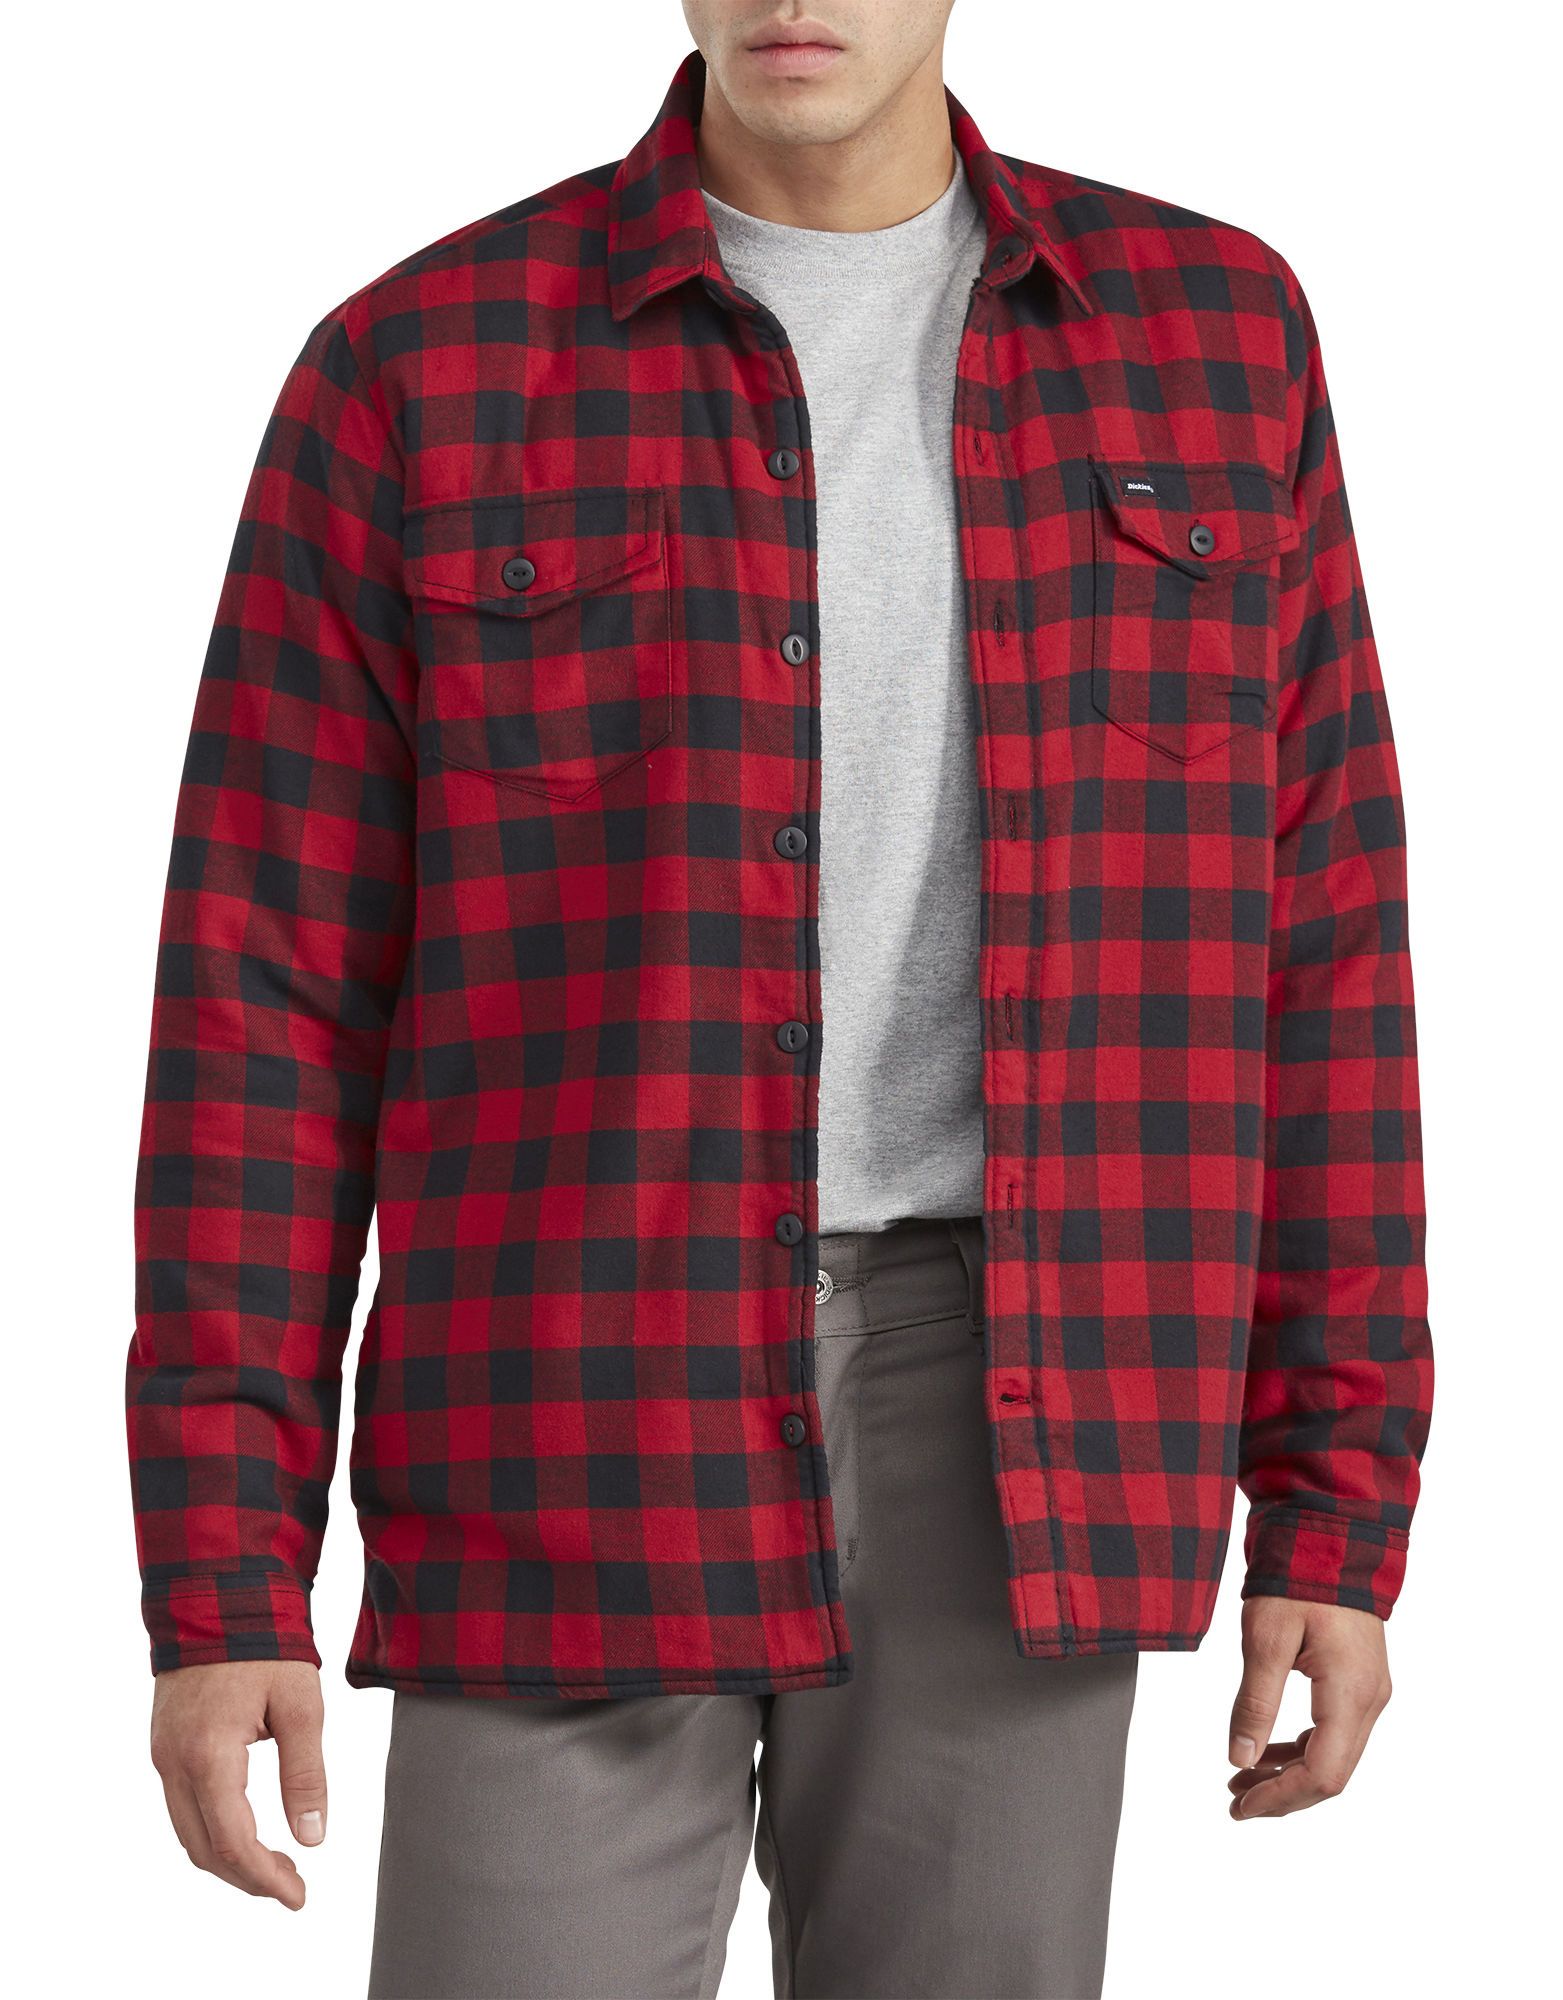 reservation krise PEF DICKIES MEN'S Dickies '67 Flannel Shirt Jacket with Sherpa Lining TW500